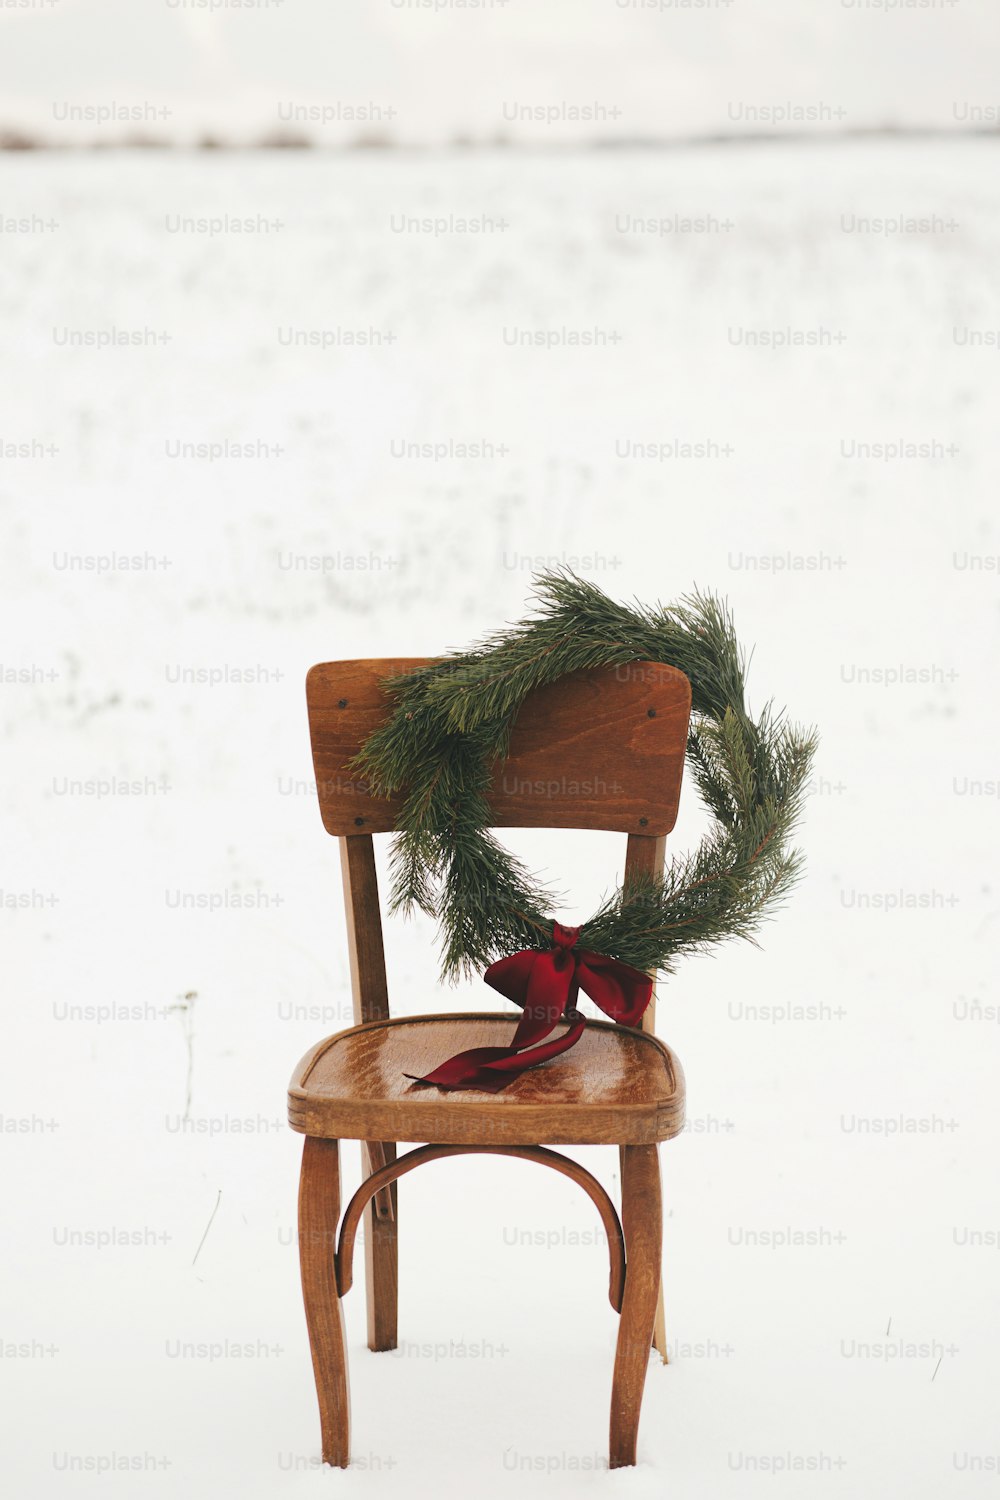 Merry Christmas! Christmas wreath on rustic chair in snowy winter field. Winter holidays in countryside. Space for text. Stylish xmas wreath with pine branches and red bow hanging on wooden chair